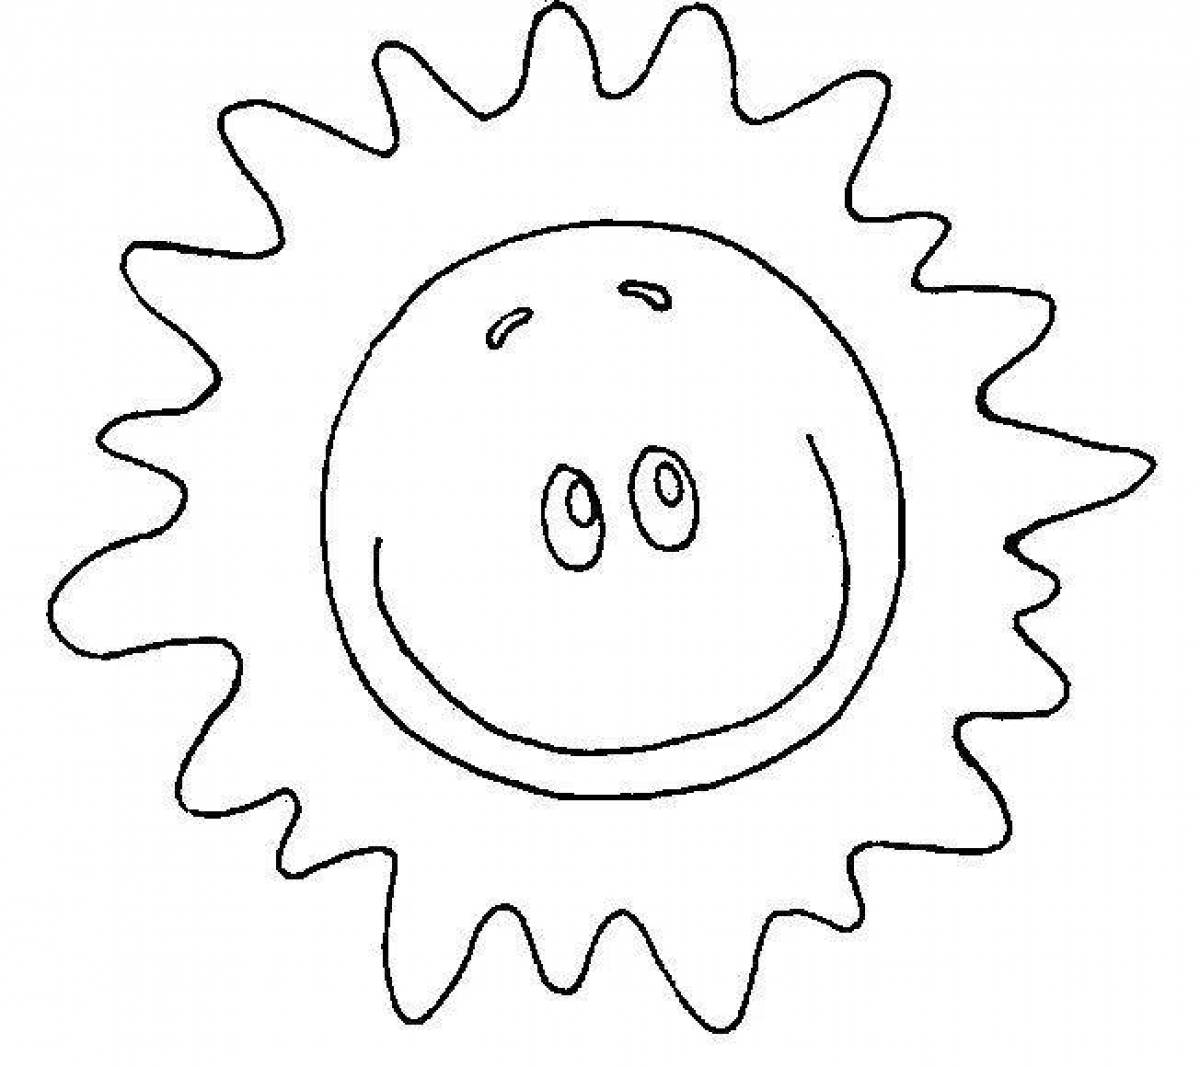 Glowing sun coloring picture